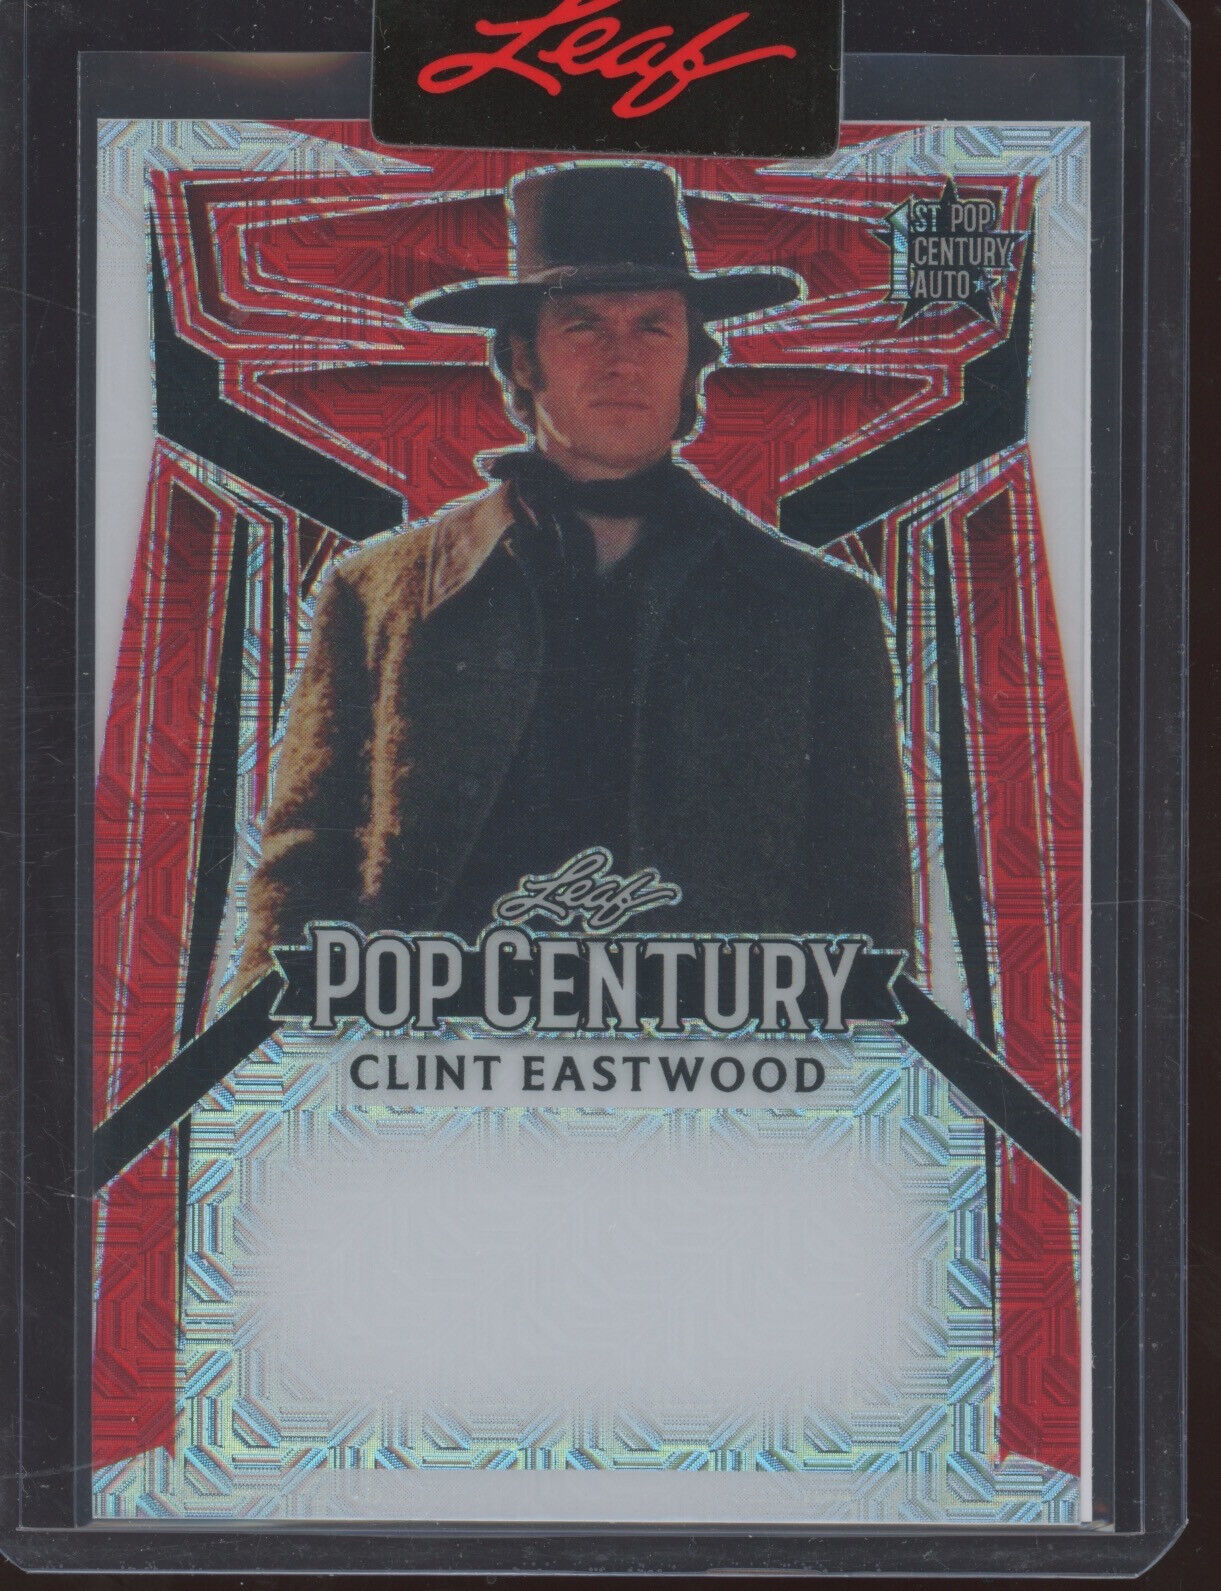 2023 Leaf Pop Century Preproduction Proof Mojo Red Clint Eastwood 1/1